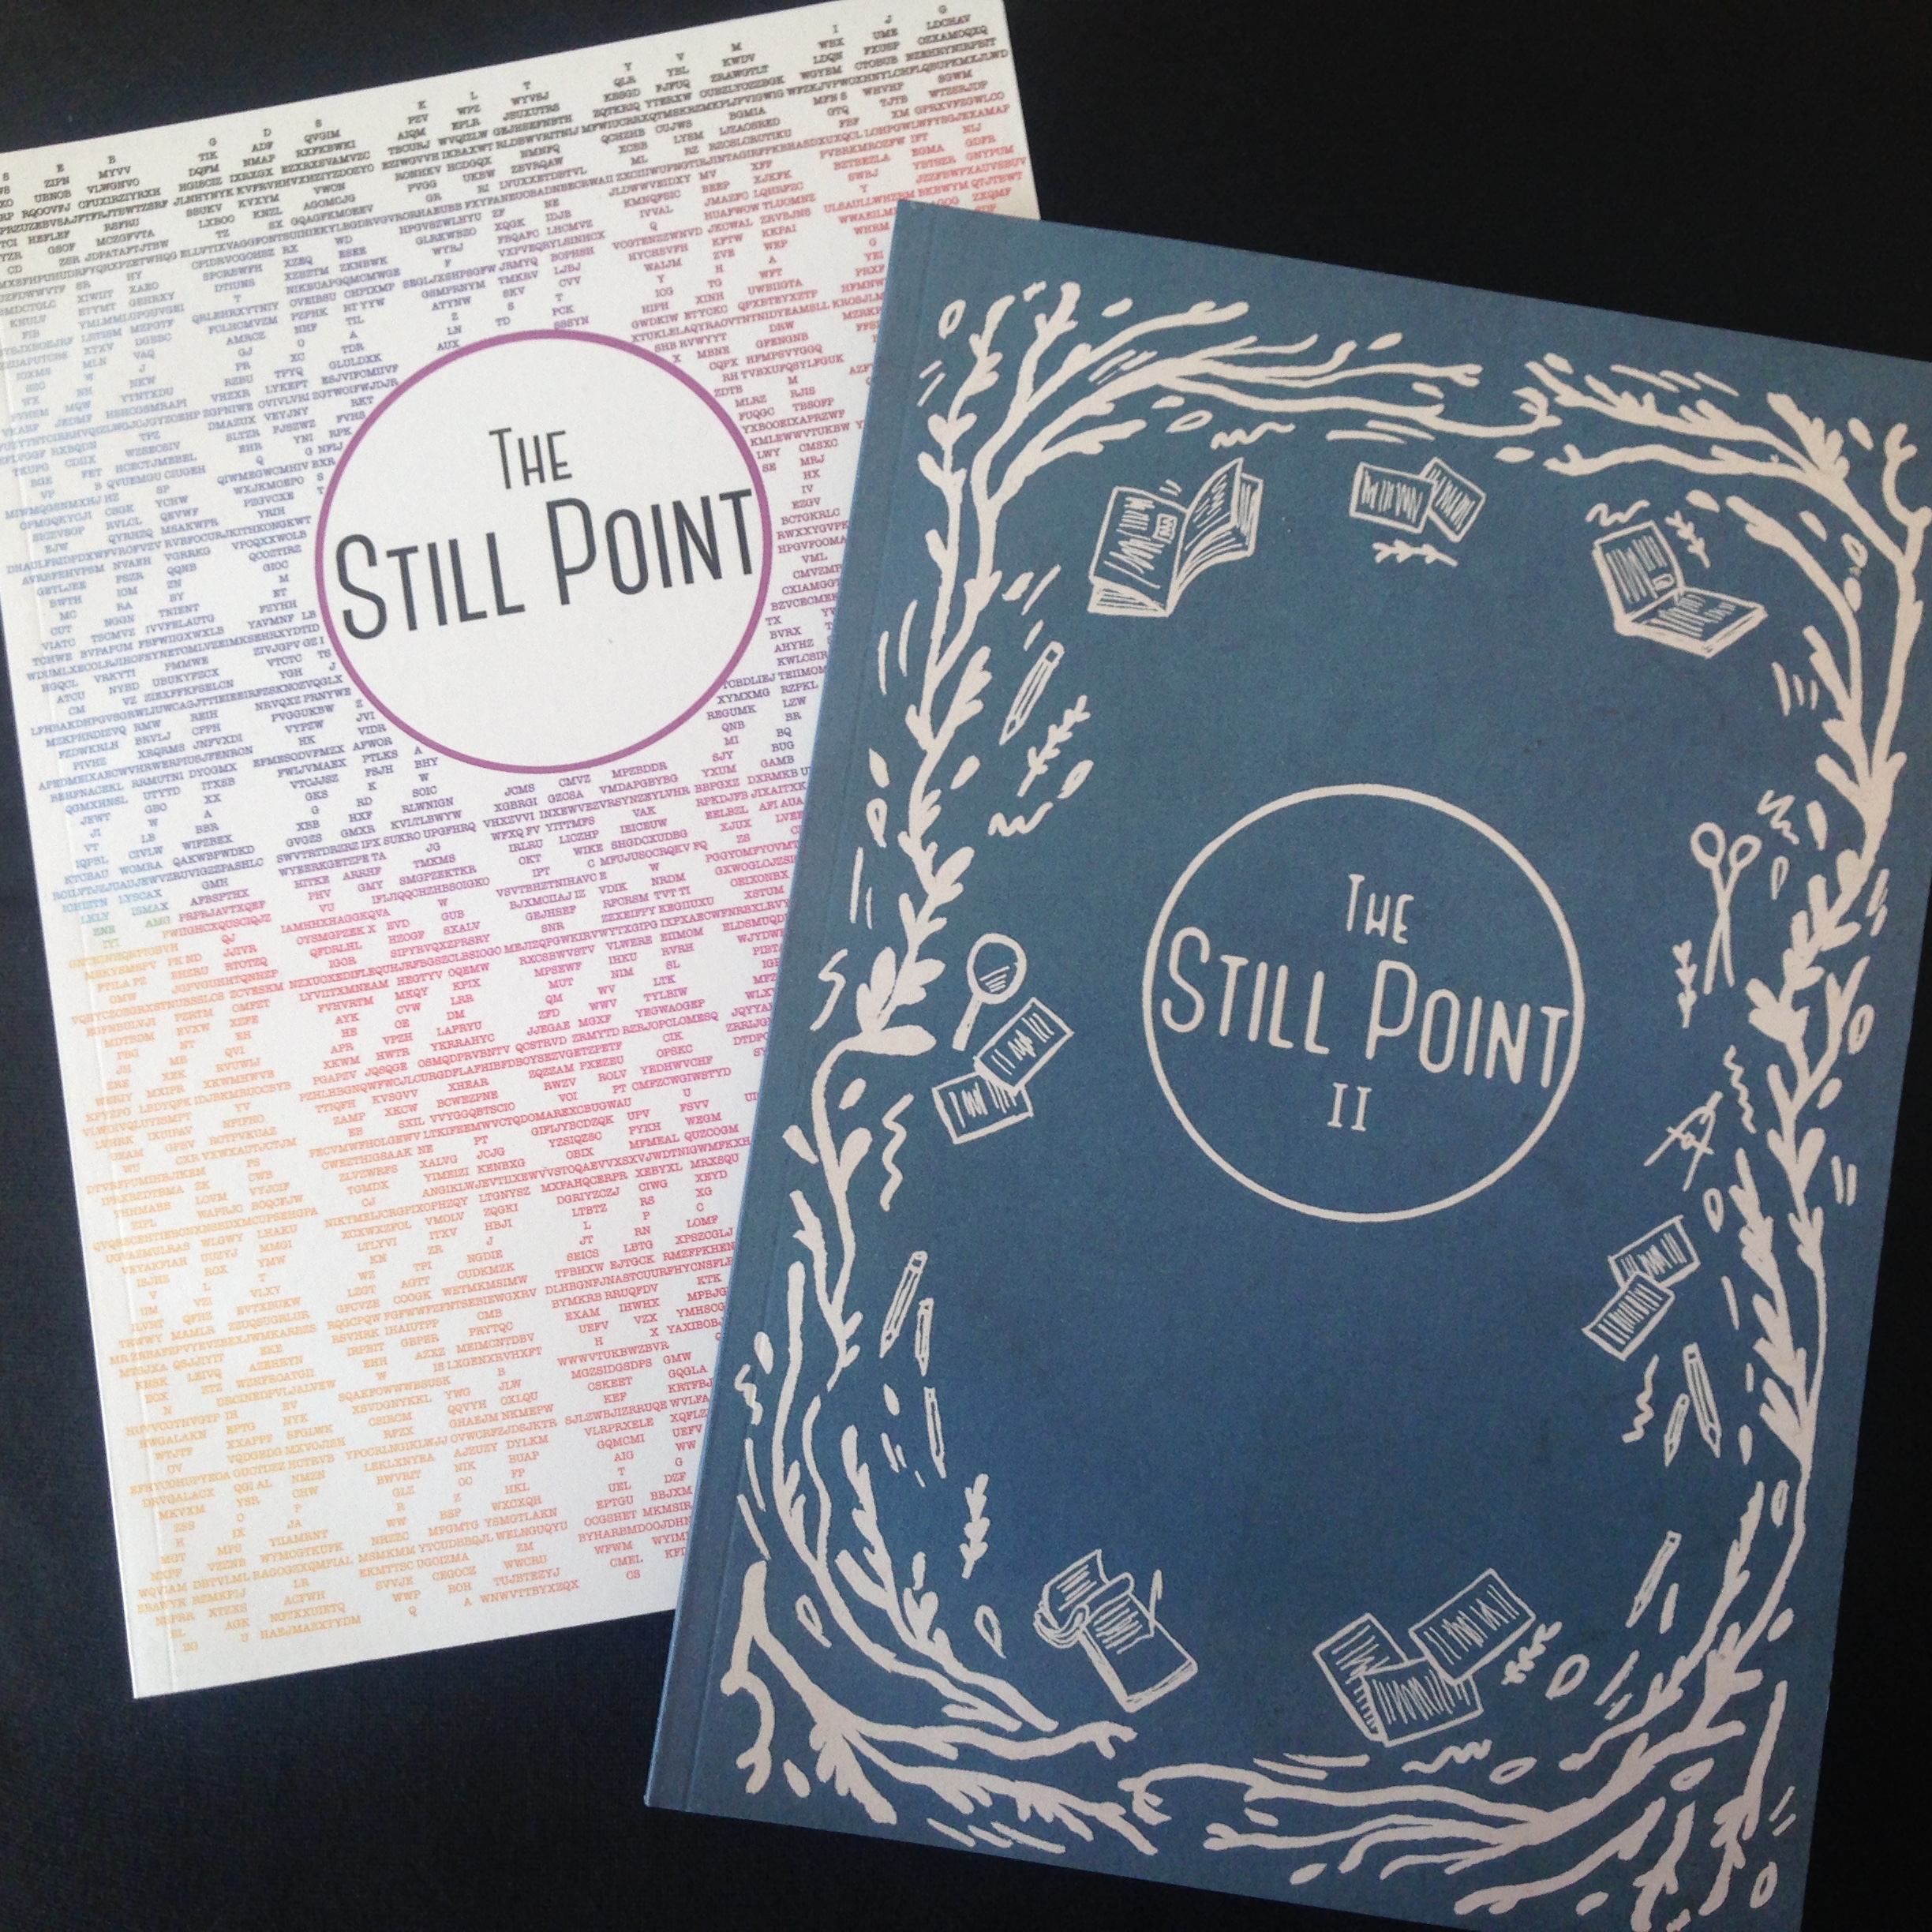 The Still Point Journal print issues. Find them in the Saison Poetry Library, British Library, and London literary events. You can also order your own copy, see The Still Point website.